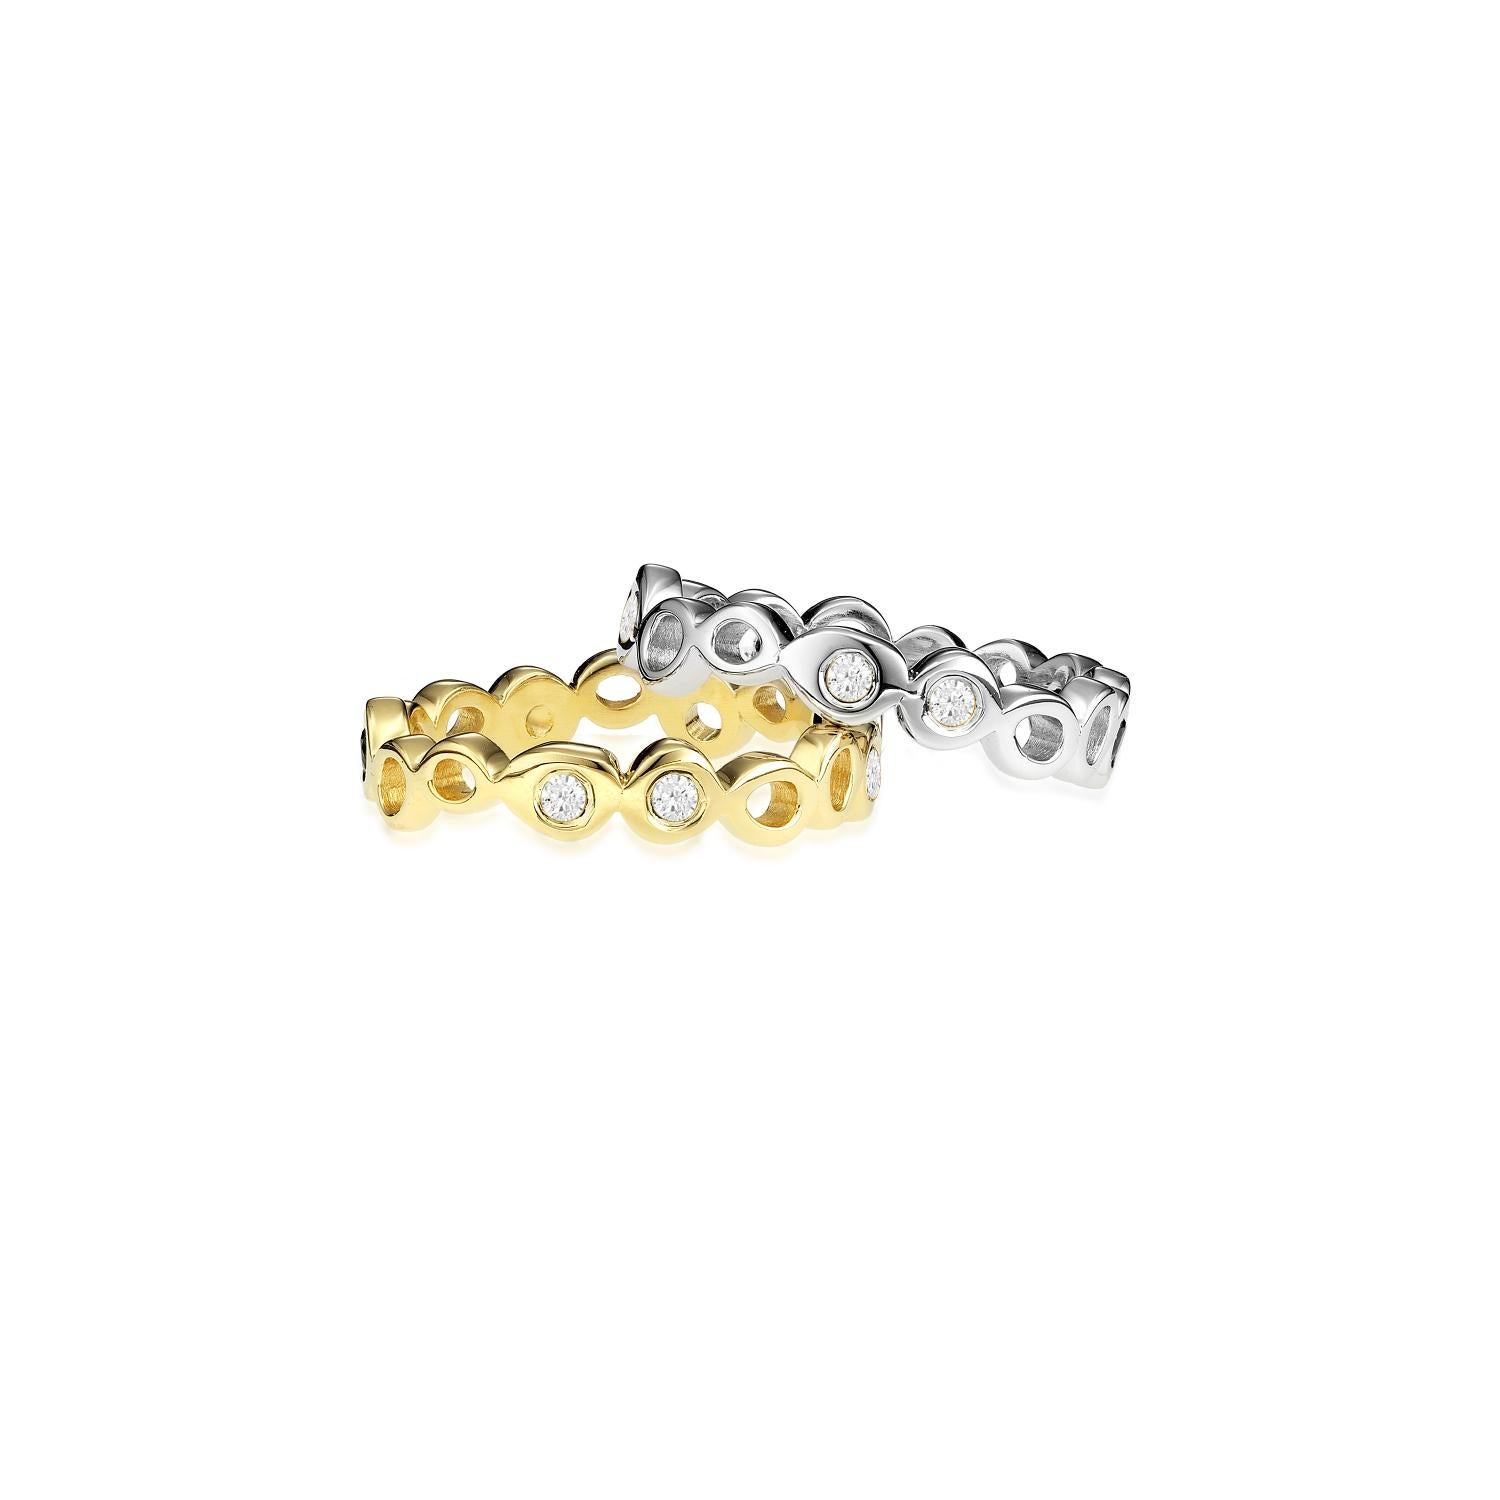 Perfect starter Hi June Parker ring band to wear stacked with your favorite ring or on its own.
Additionally a great alternative for an engagement or wedding band.

Inspired by seeing the cross-section view of life, as if slicing a tree to see its